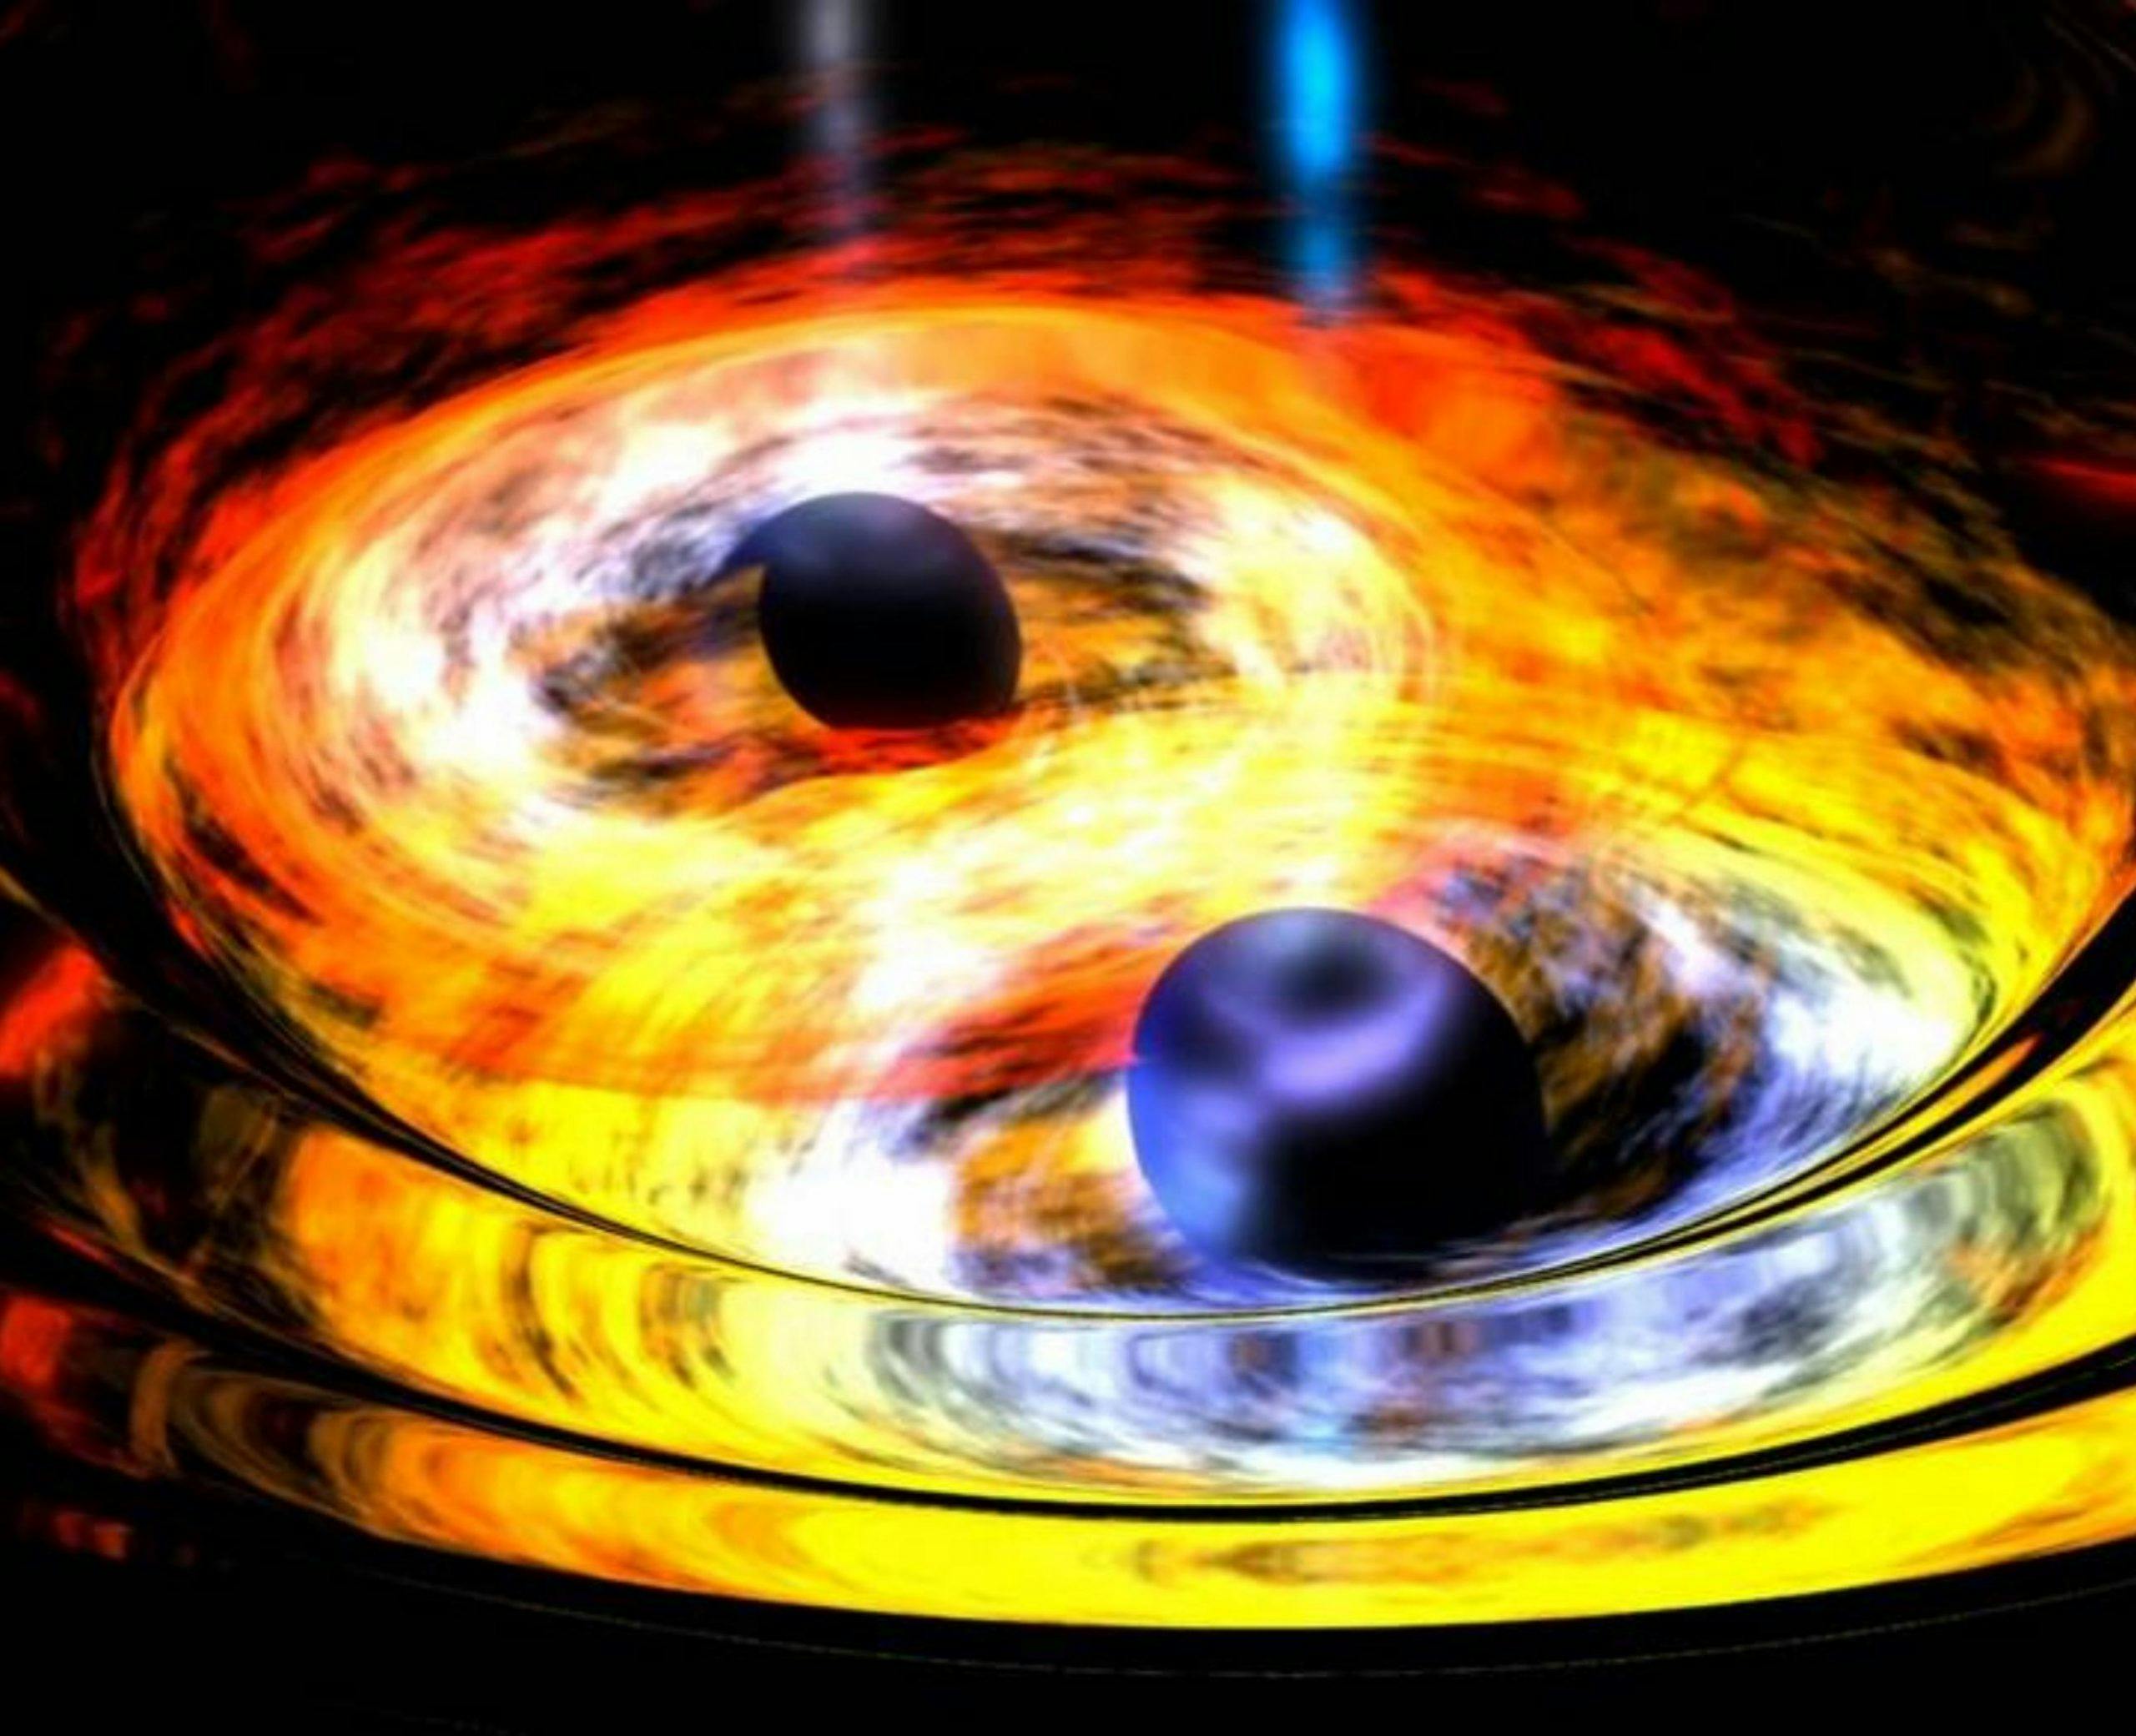 artist impression of two black holes colliding. The image shows two black circles surrounded by circles of yellow and orange light